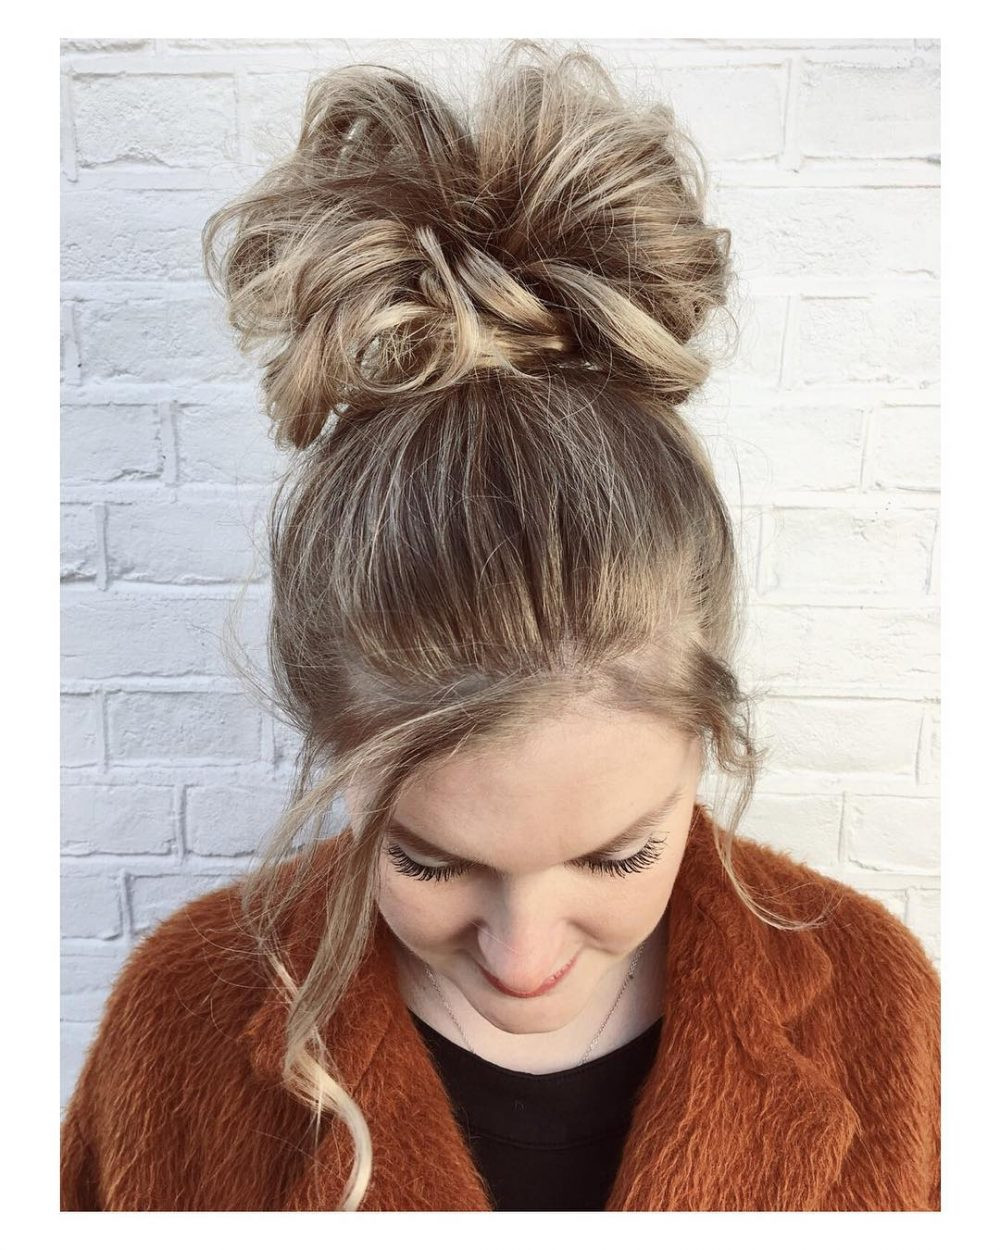 Hairstyle Updos Easy
 Updos for Long Hair – Cute & Easy Updos for 2020